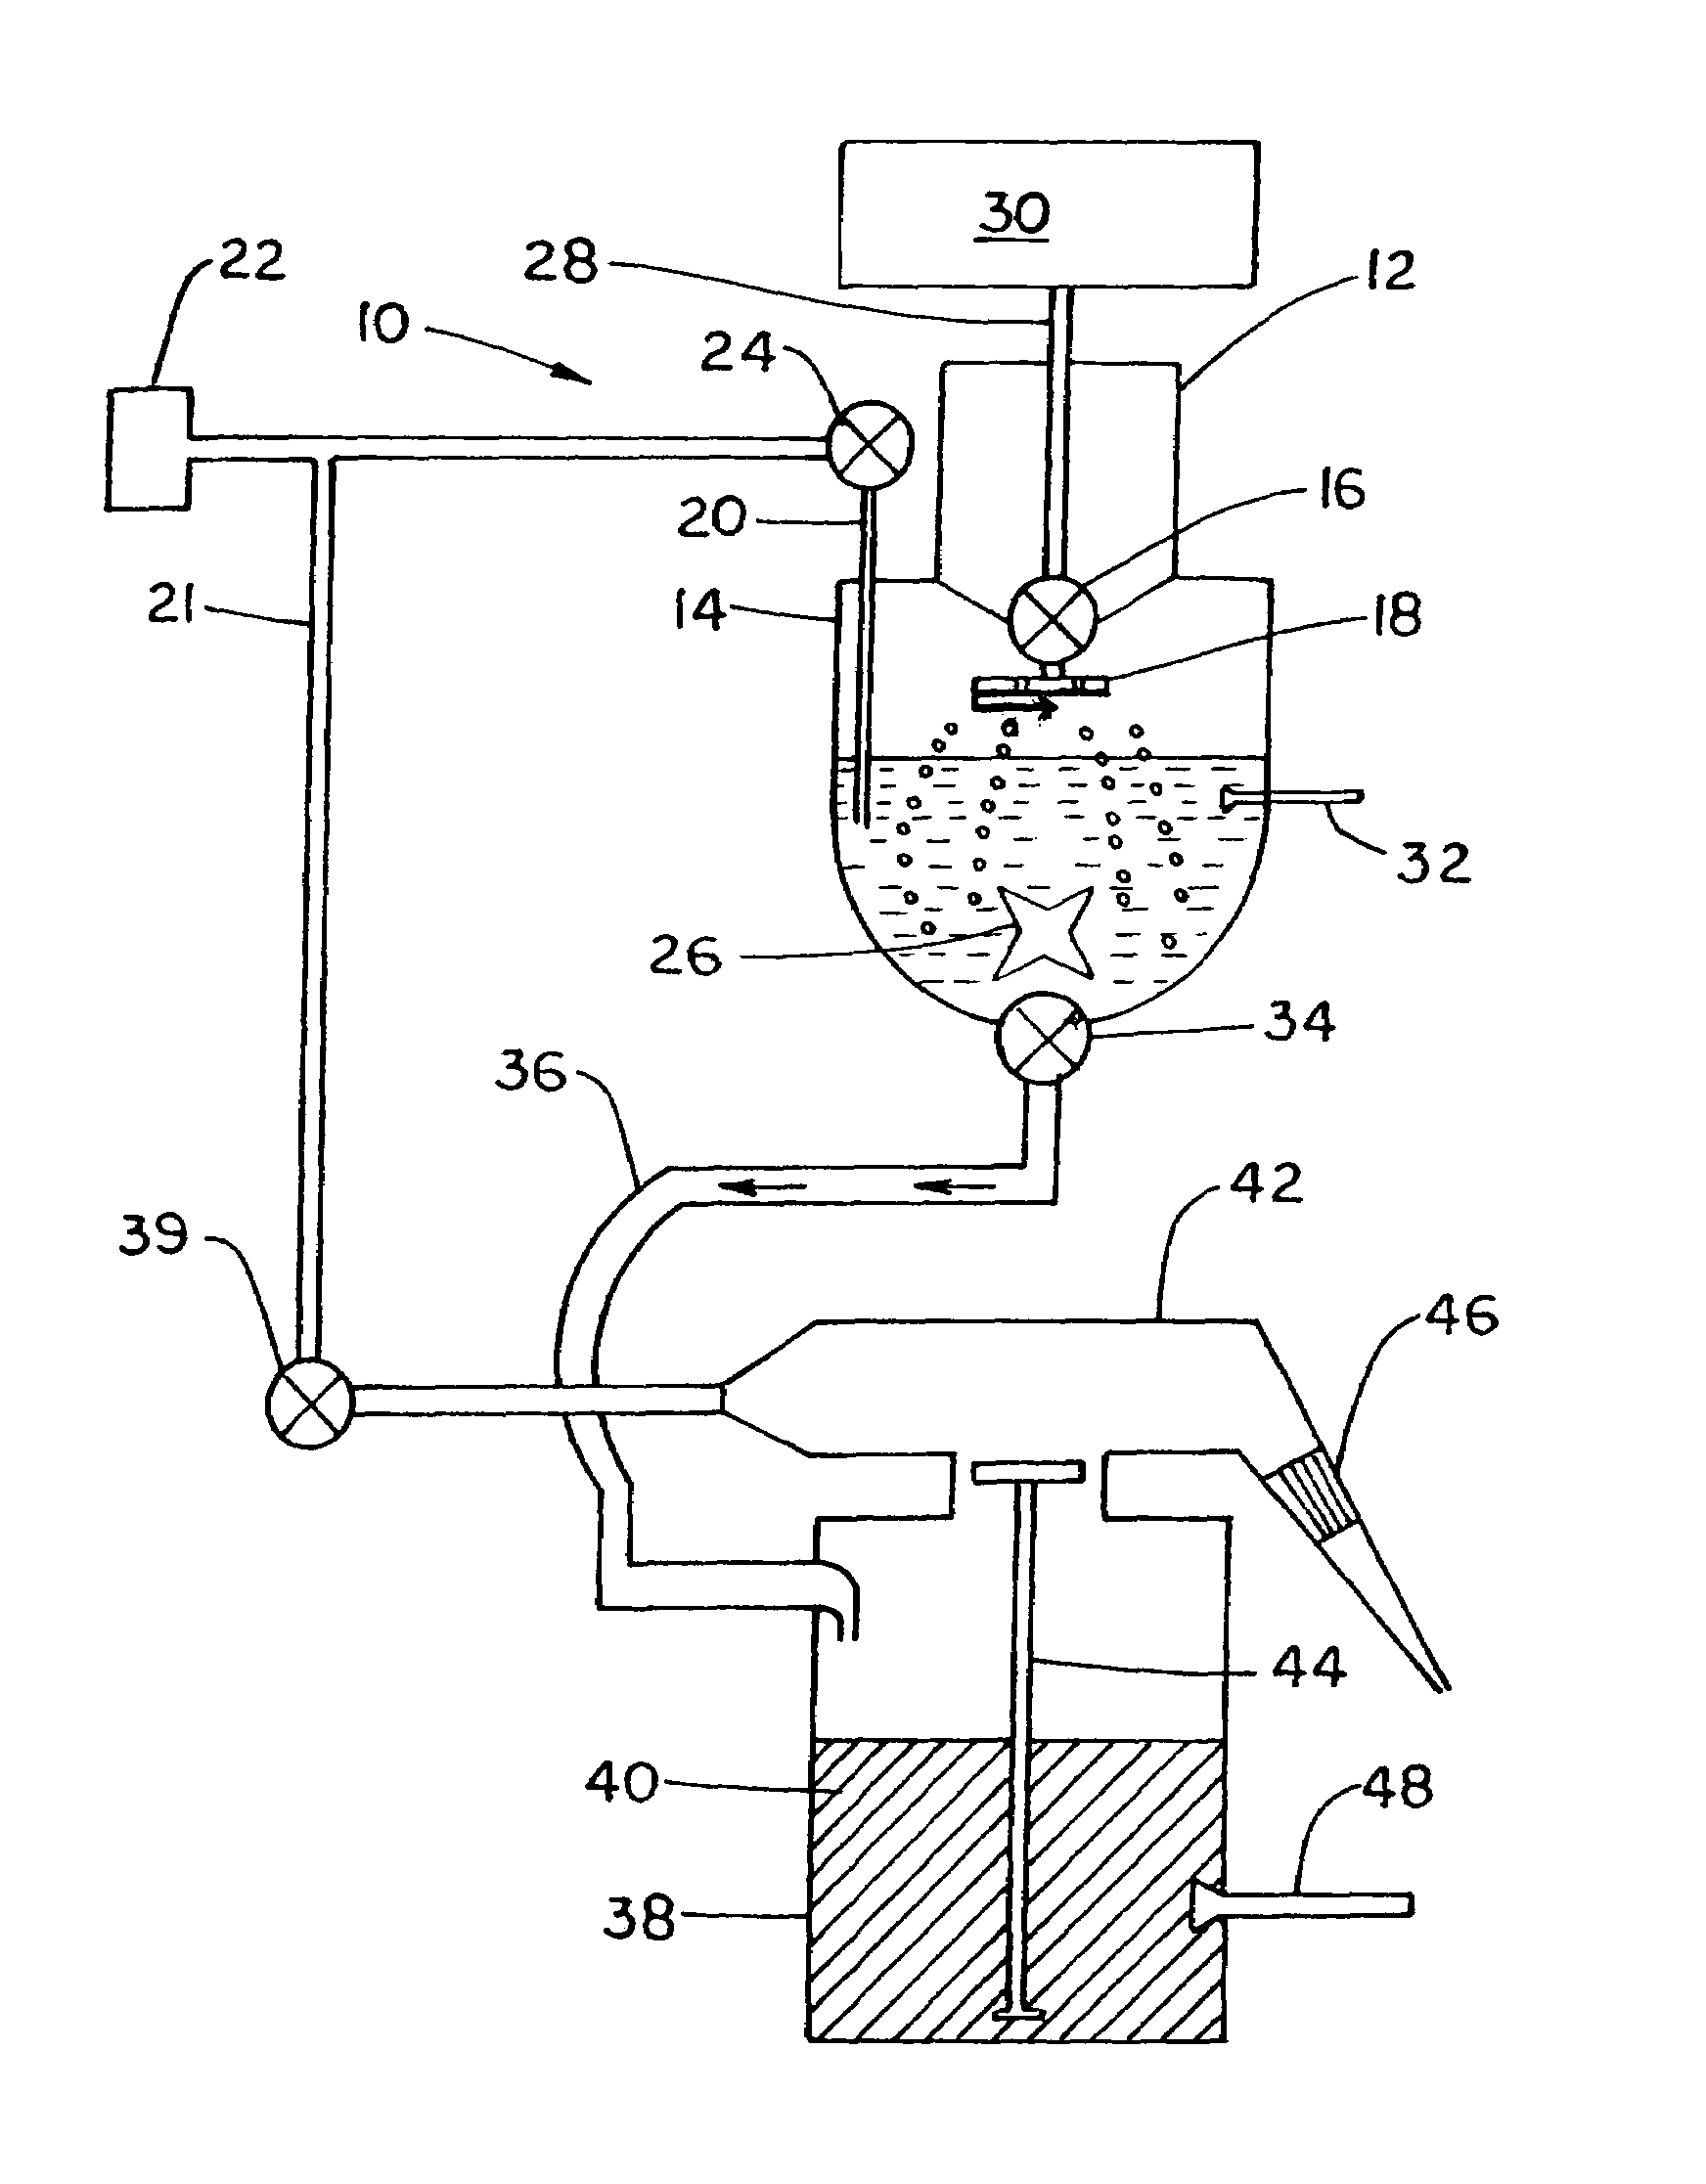 Apparatus for mixing and dispensing powder